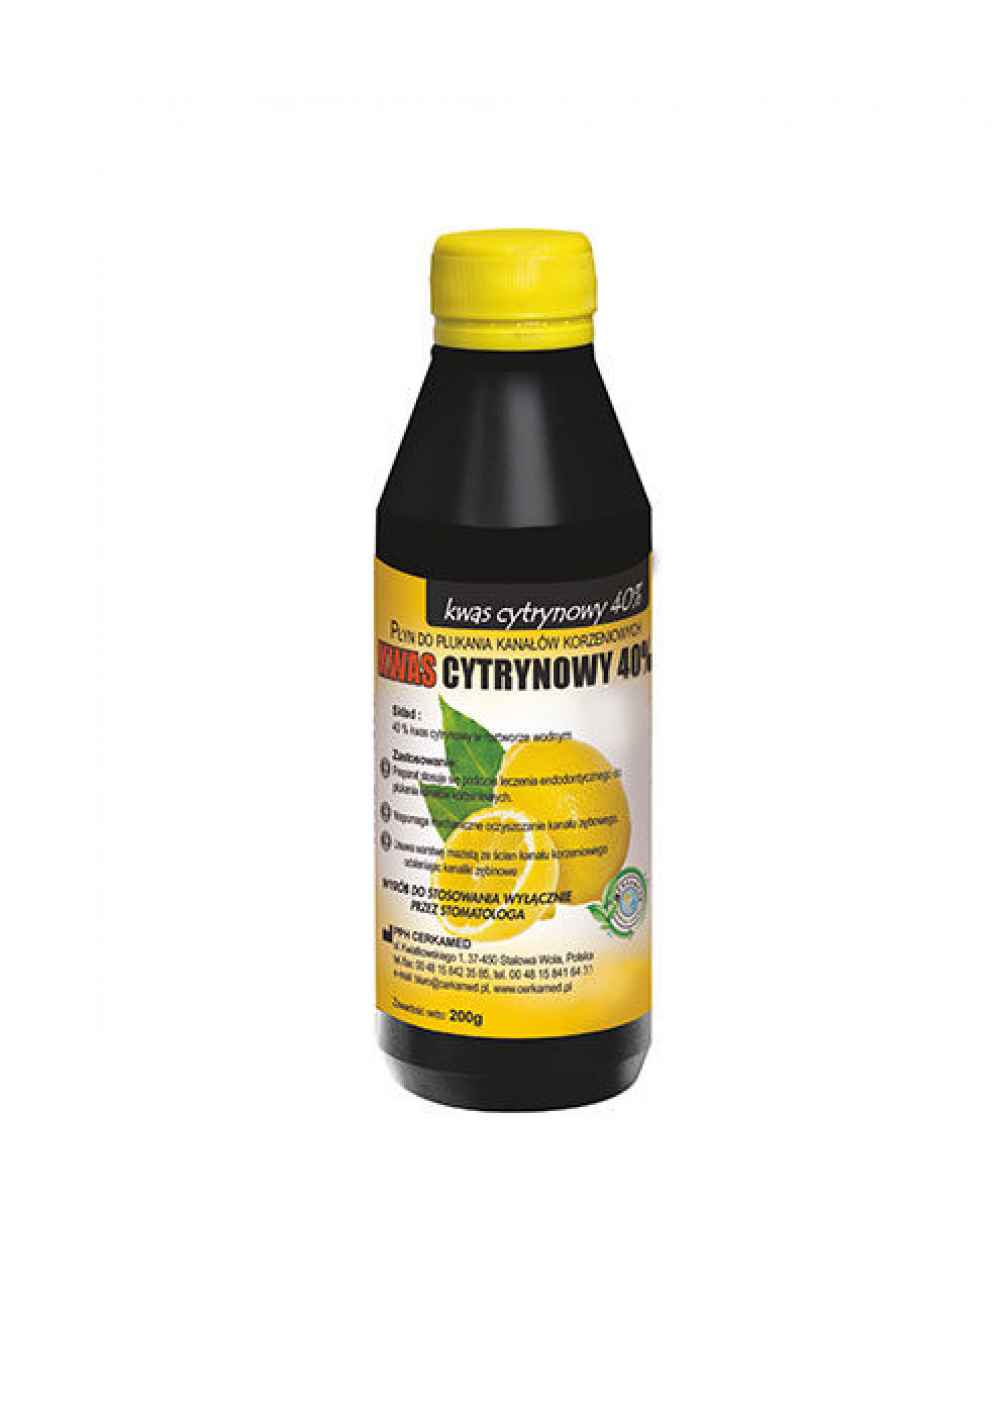 Cerkamed Citric Acid 40% Root Canal Irrigating Solution